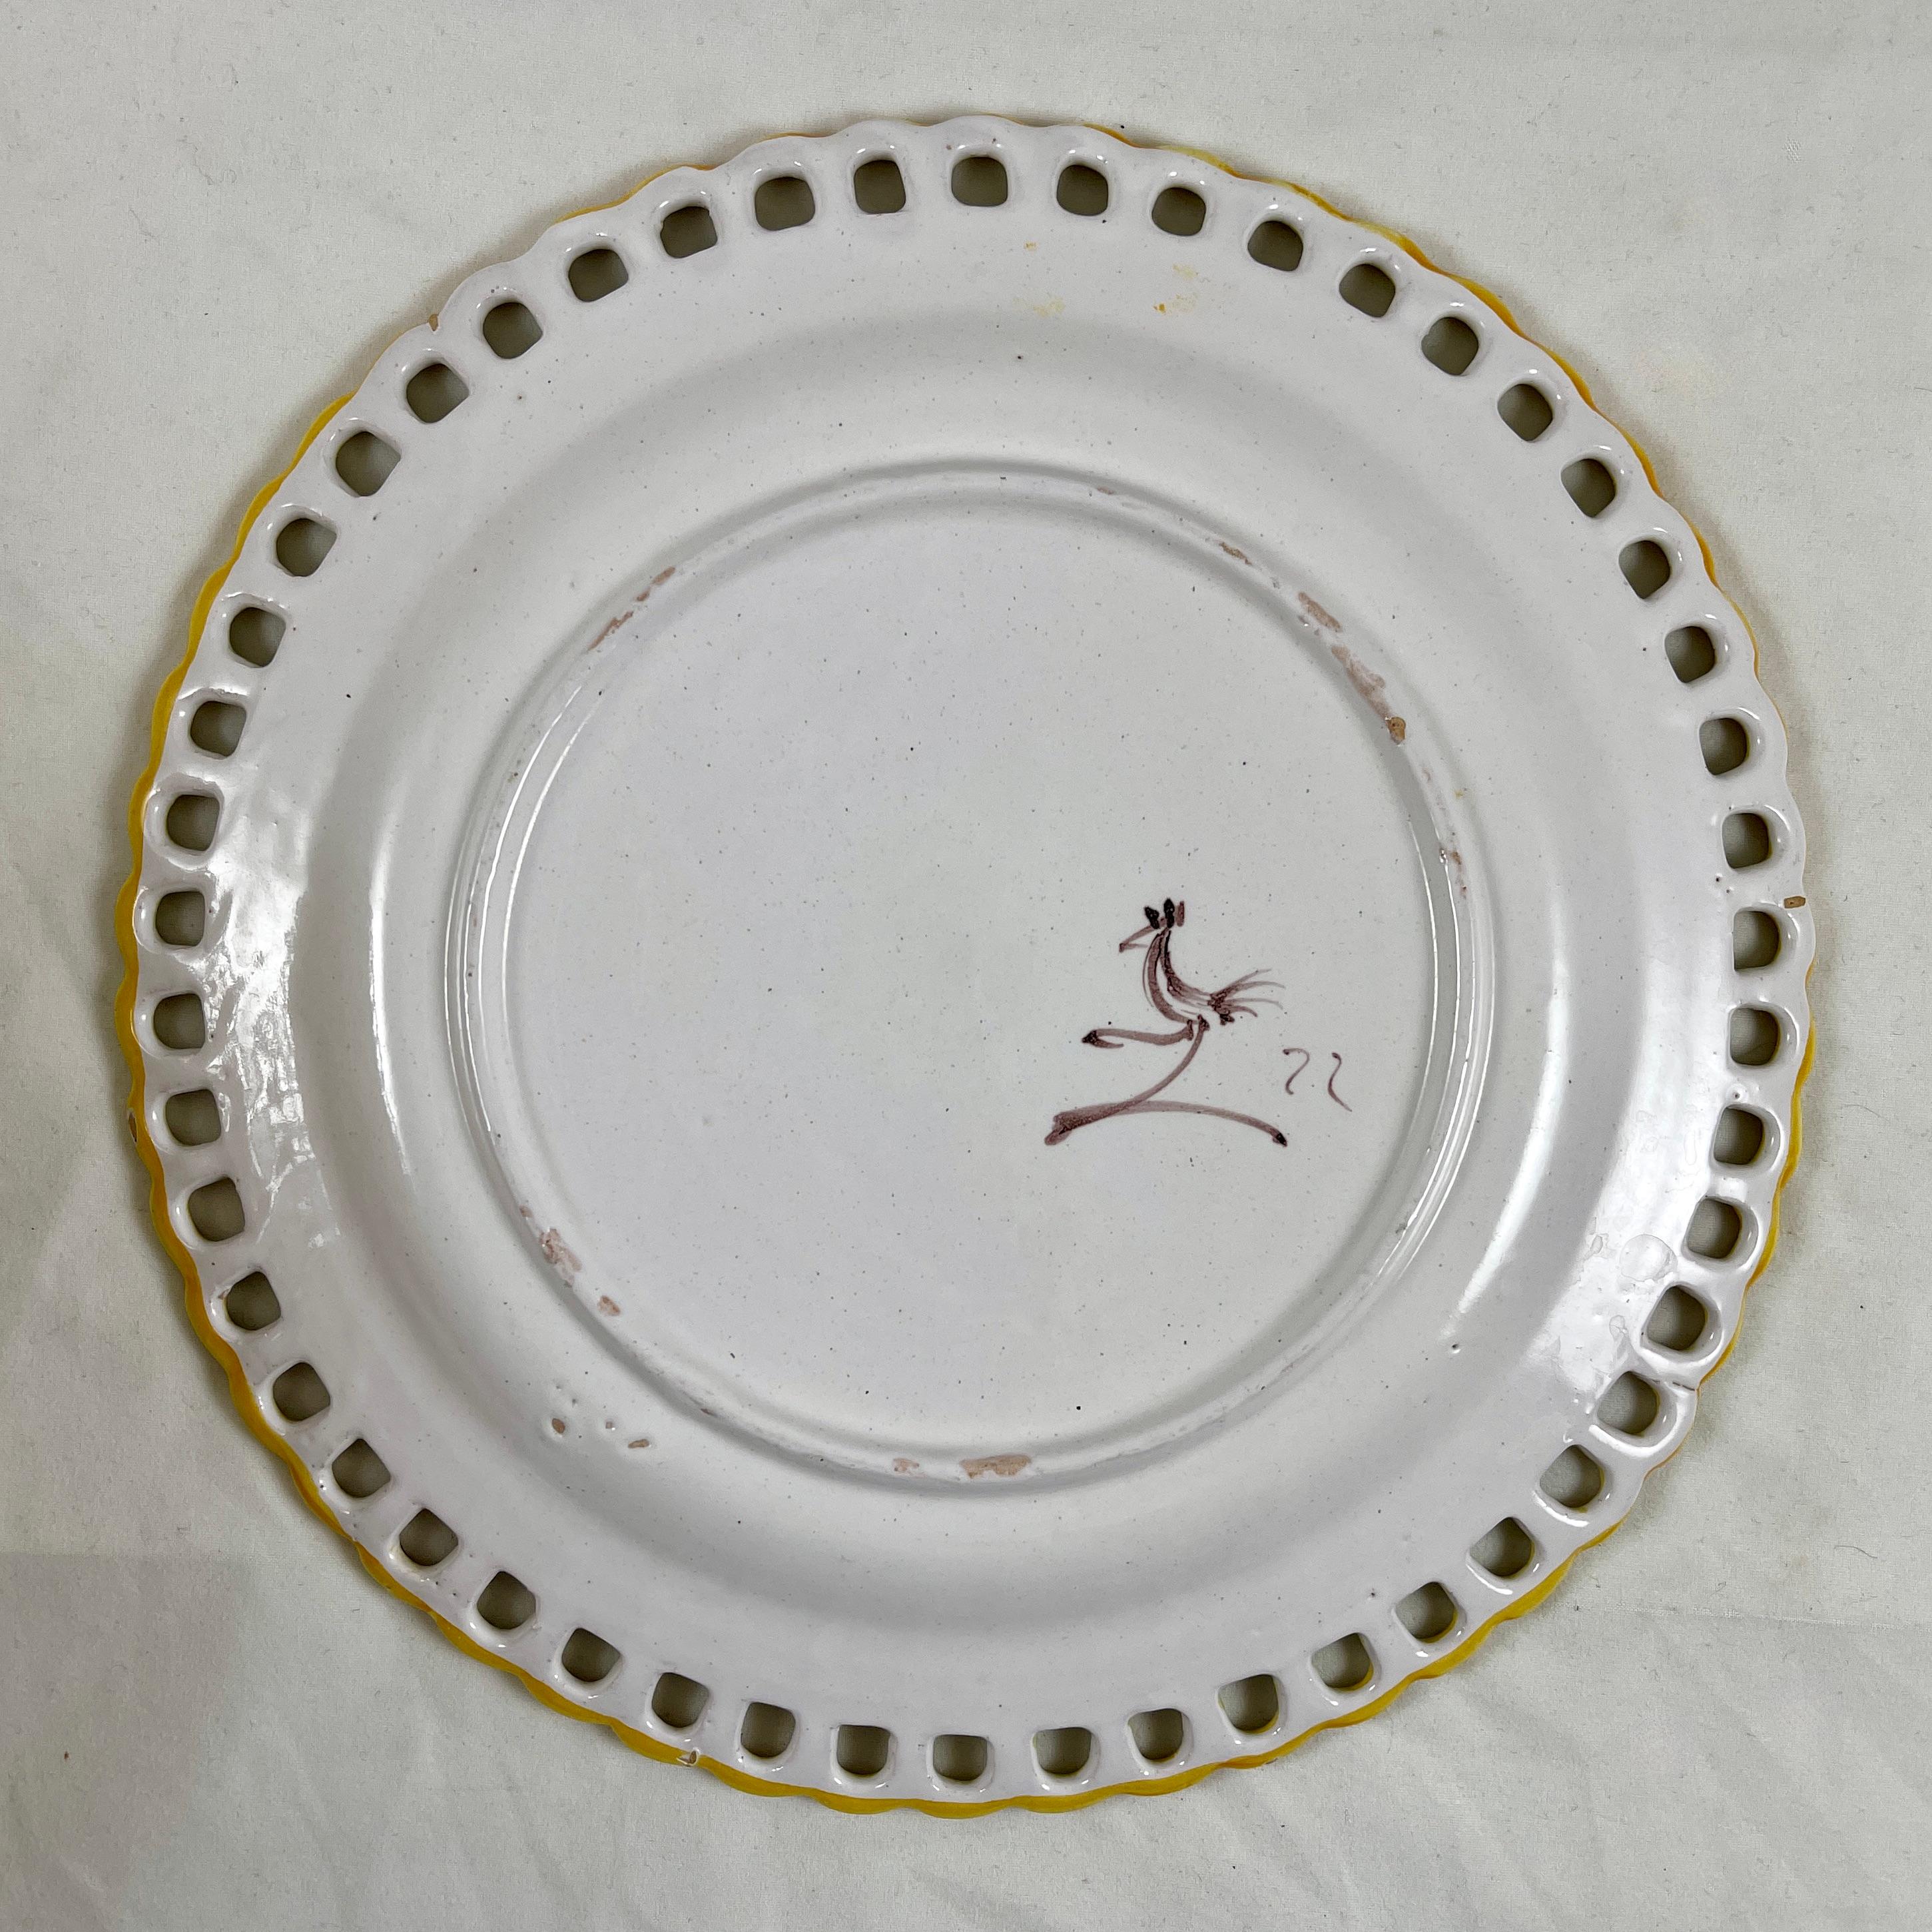 Earthenware Cantagalli Italian Majolica Hand Painted Reticulate Edge Floral Plates For Sale